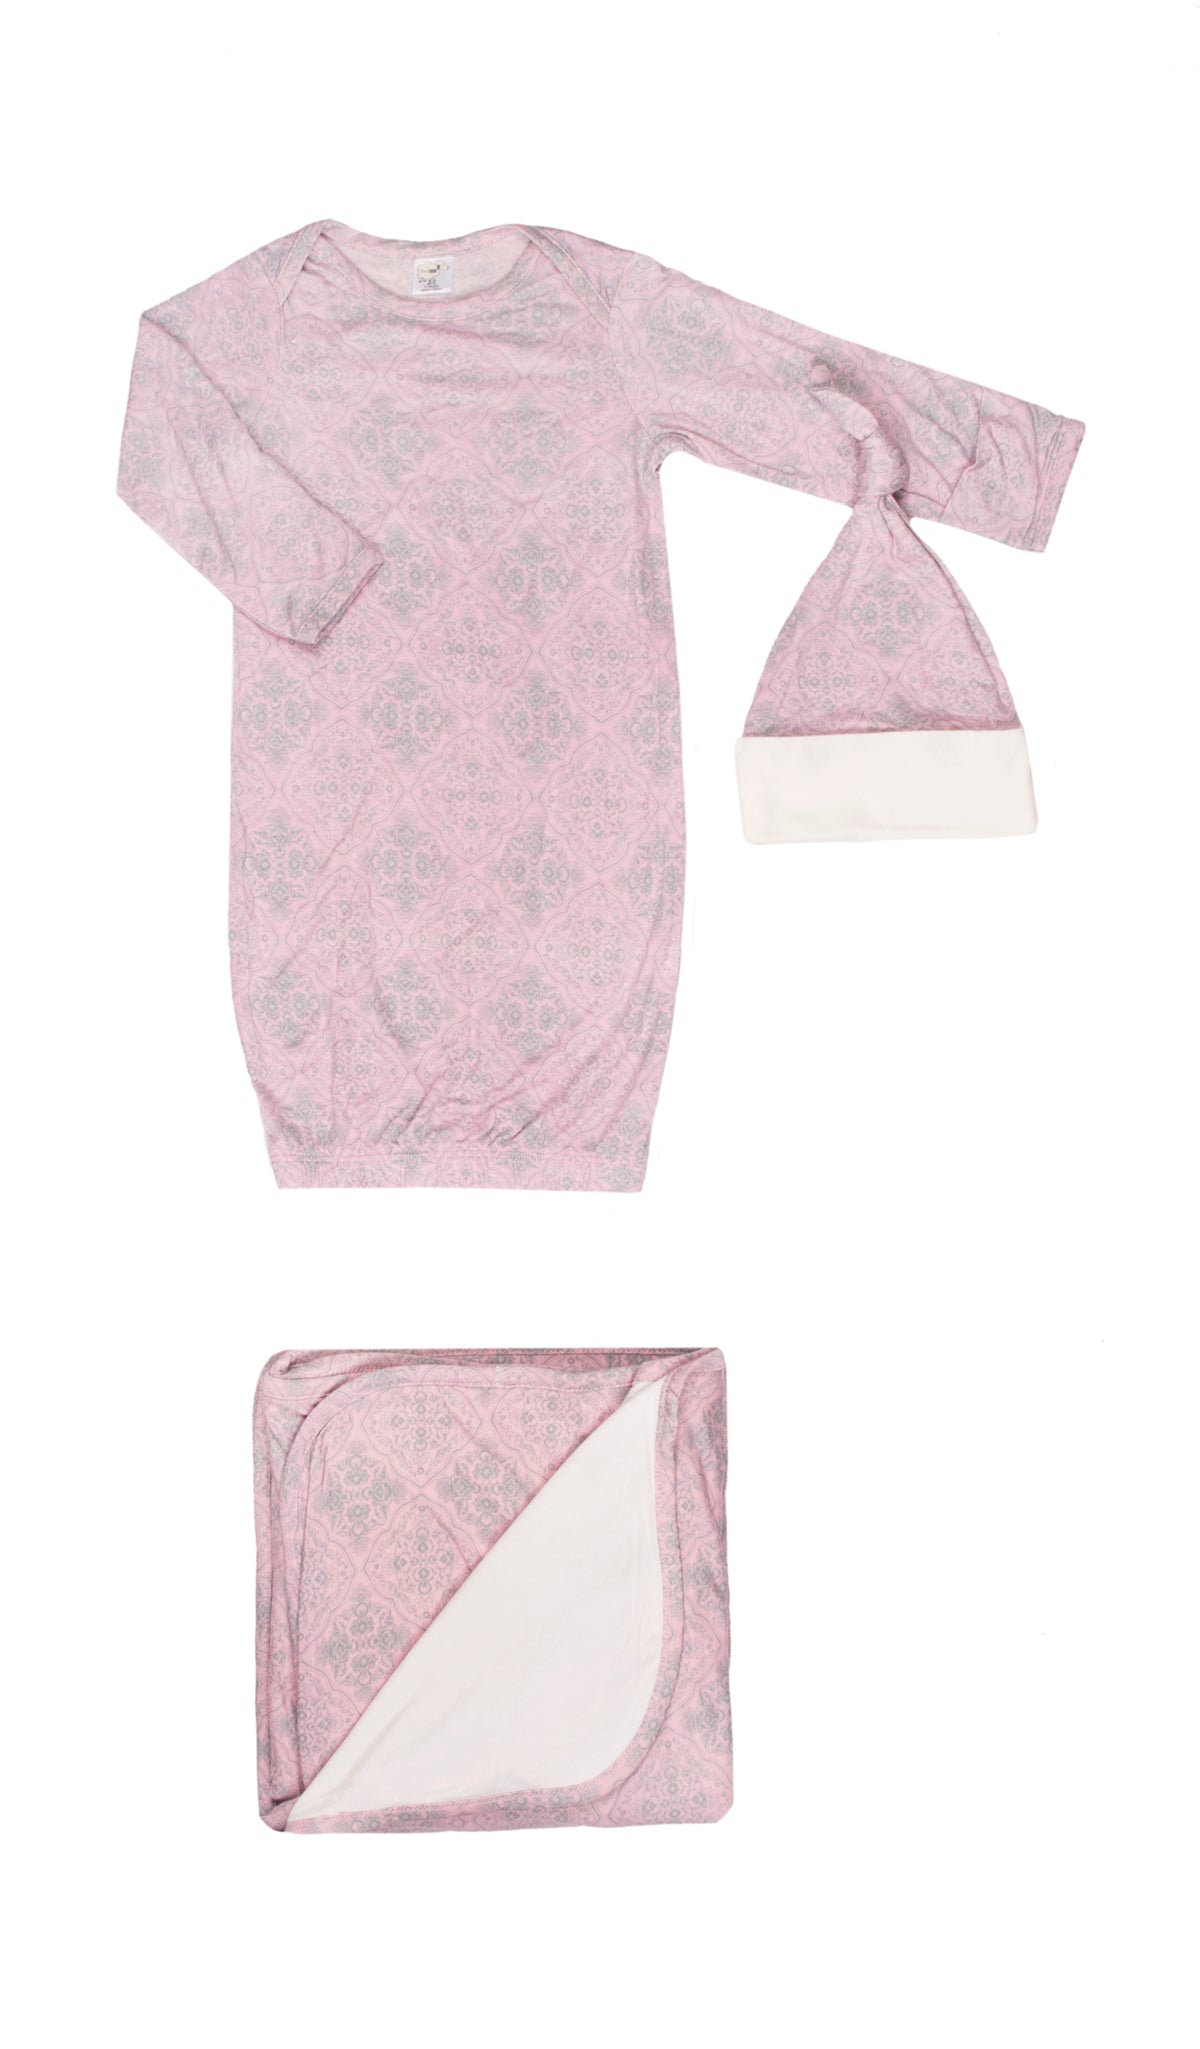 Baby's Welcome Home 3 Piece Set Vintage. Flat shot of baby gown, knotted baby hat and matching blanket in Vintage print.